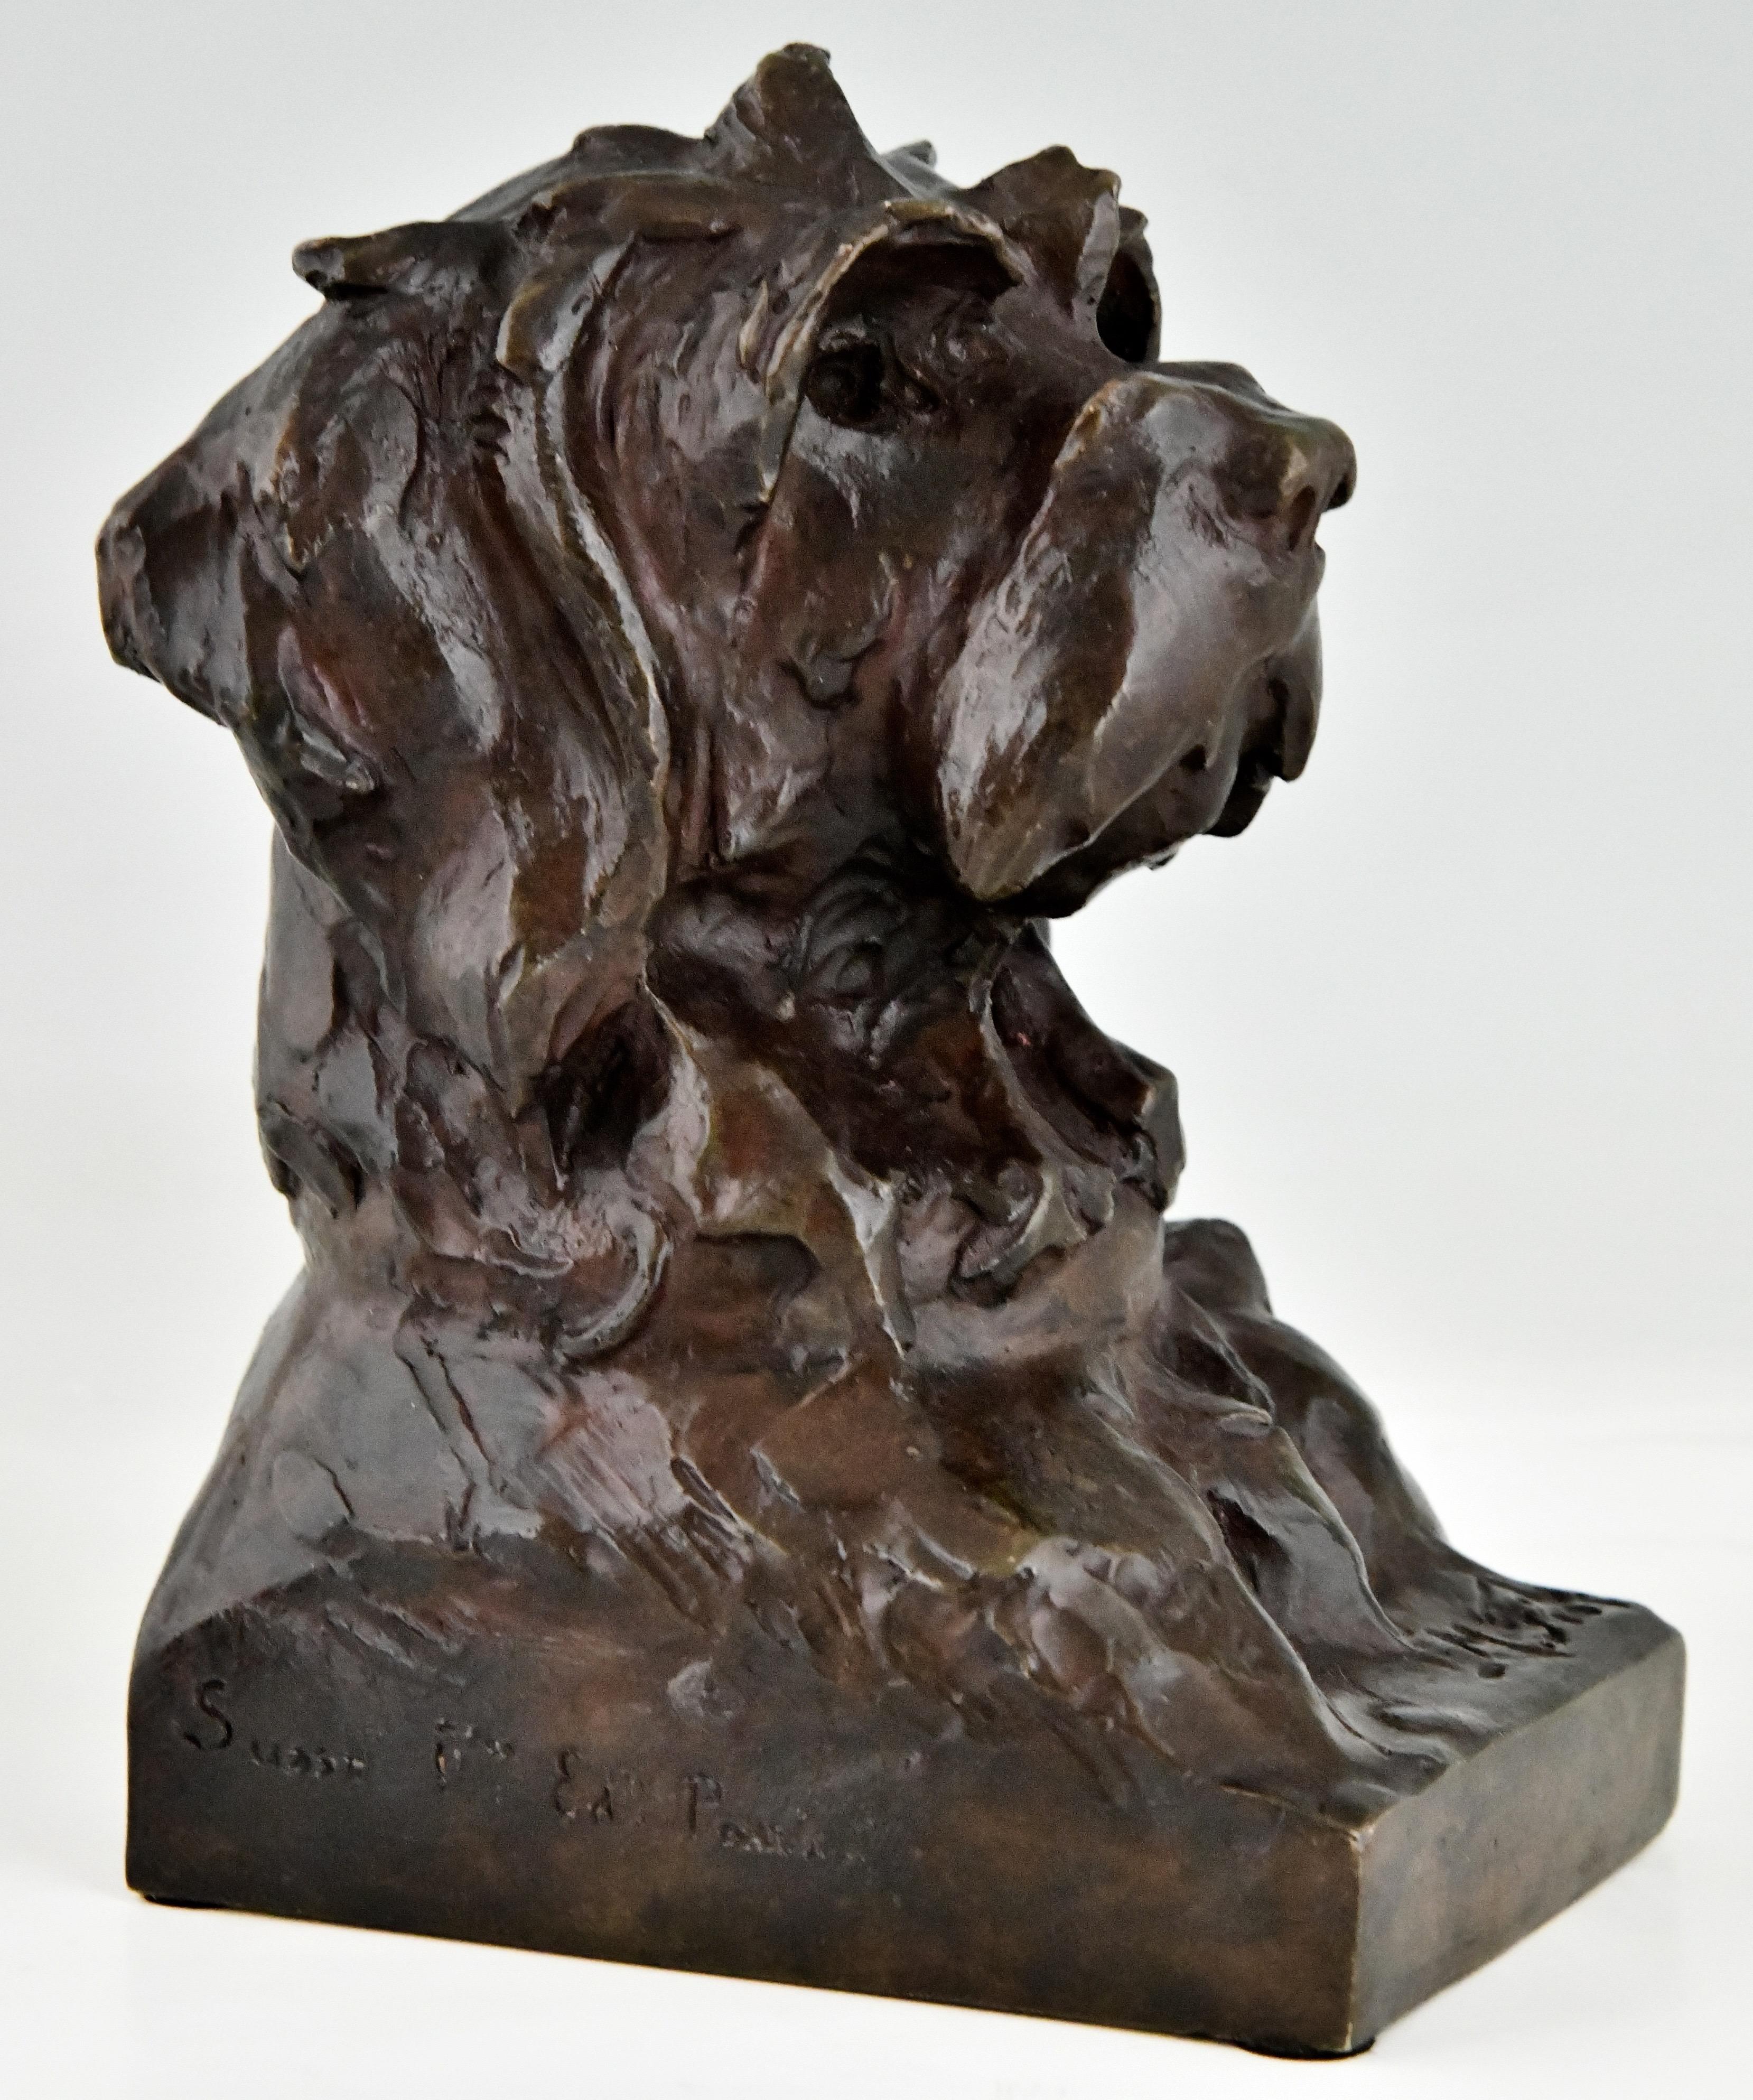 Early 20th Century Art Deco Bronze Sculpture Terrier Dog Bookends by L. Fiot, Susse Frères Foundry